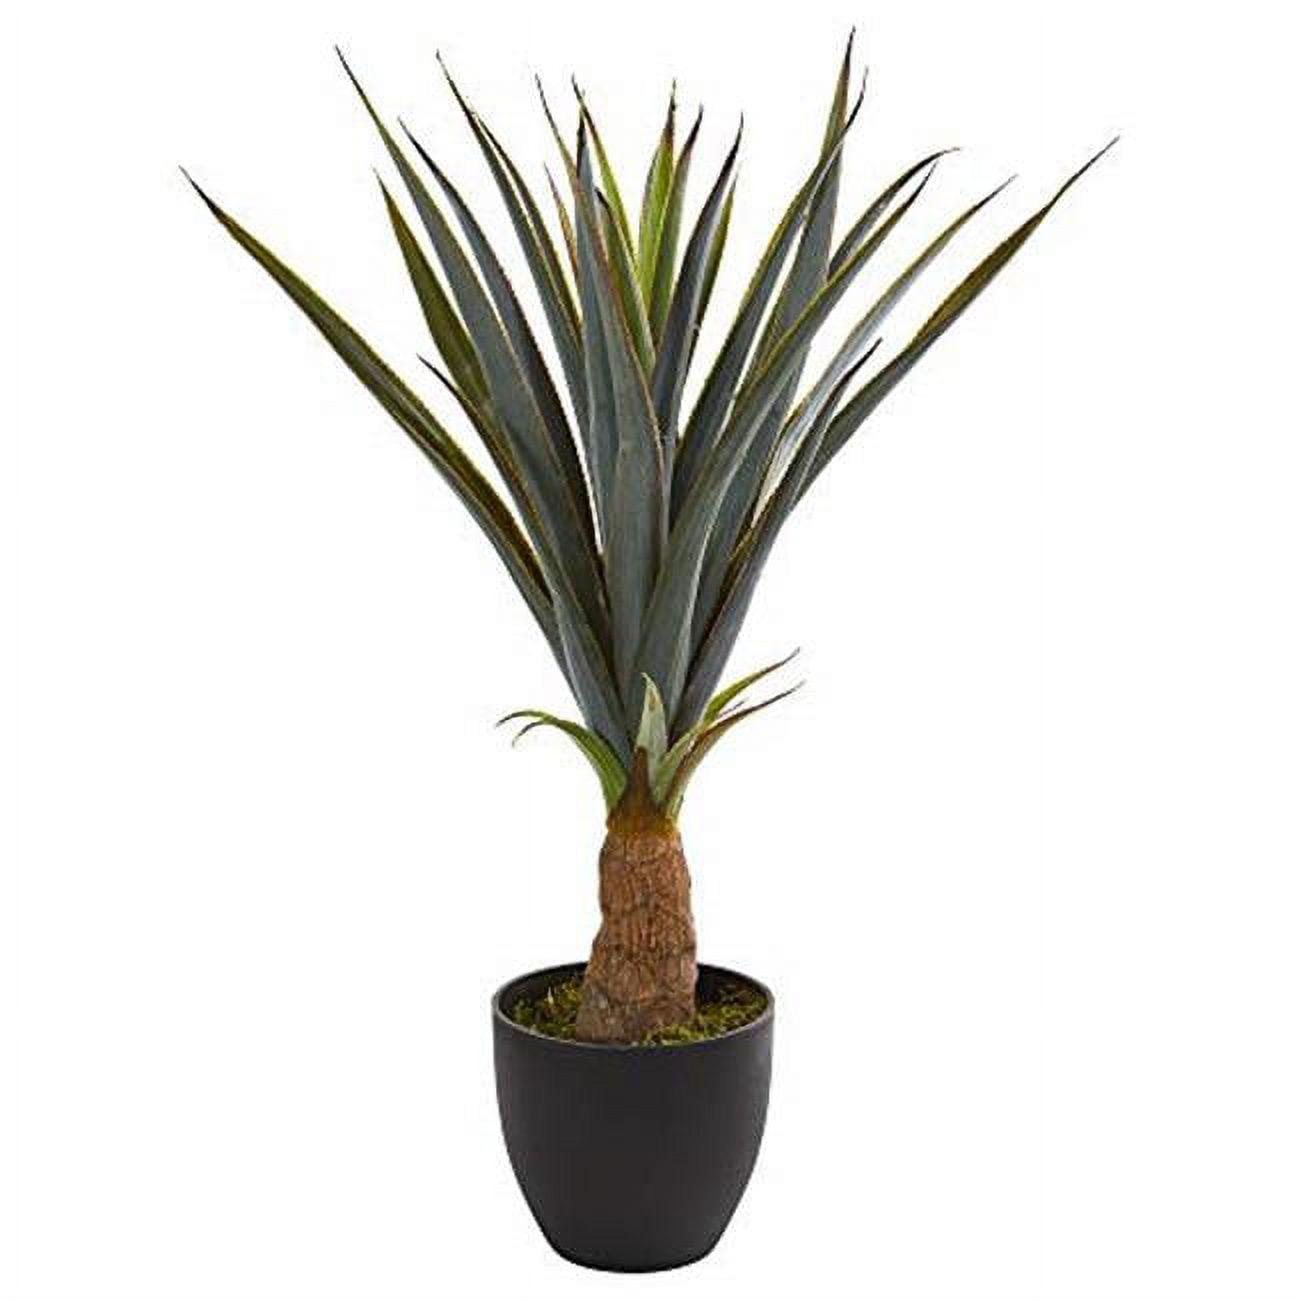 30" Green Faux Agave Plant with Textured Trunk